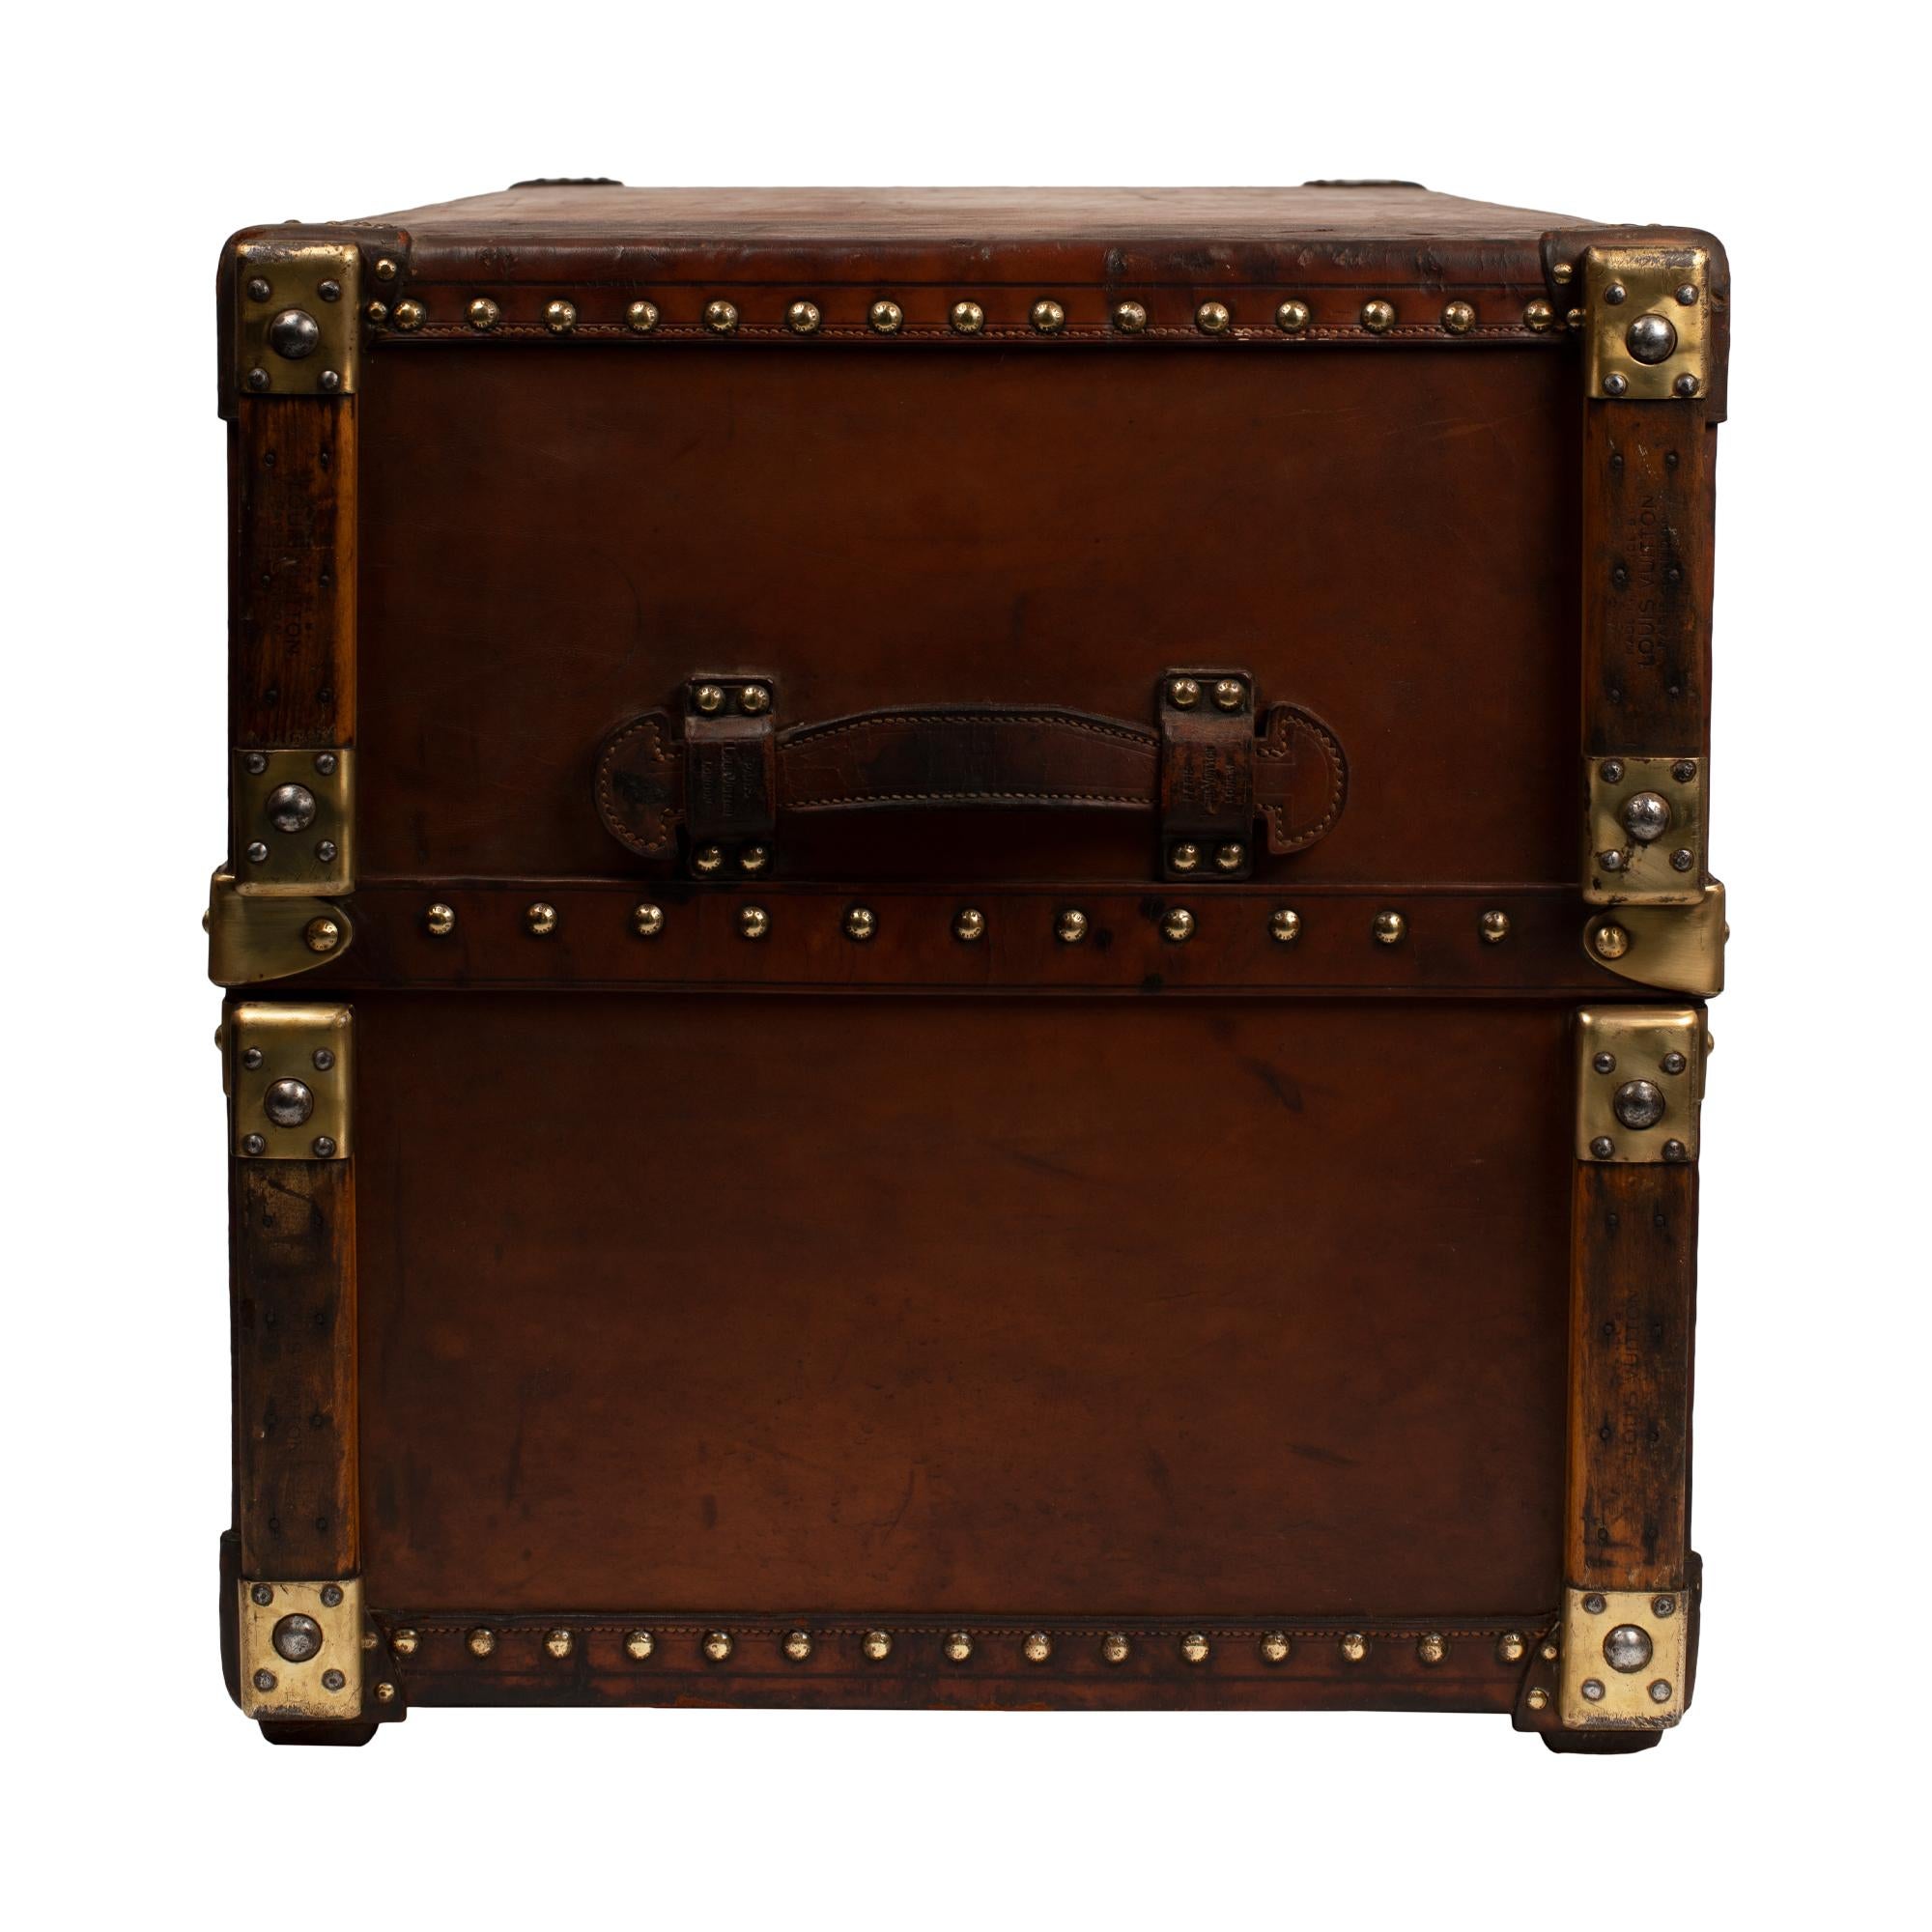 RARE Collector Louis Vuitton Wardrobe Trunk in brown cow leather 1920/1930's 3